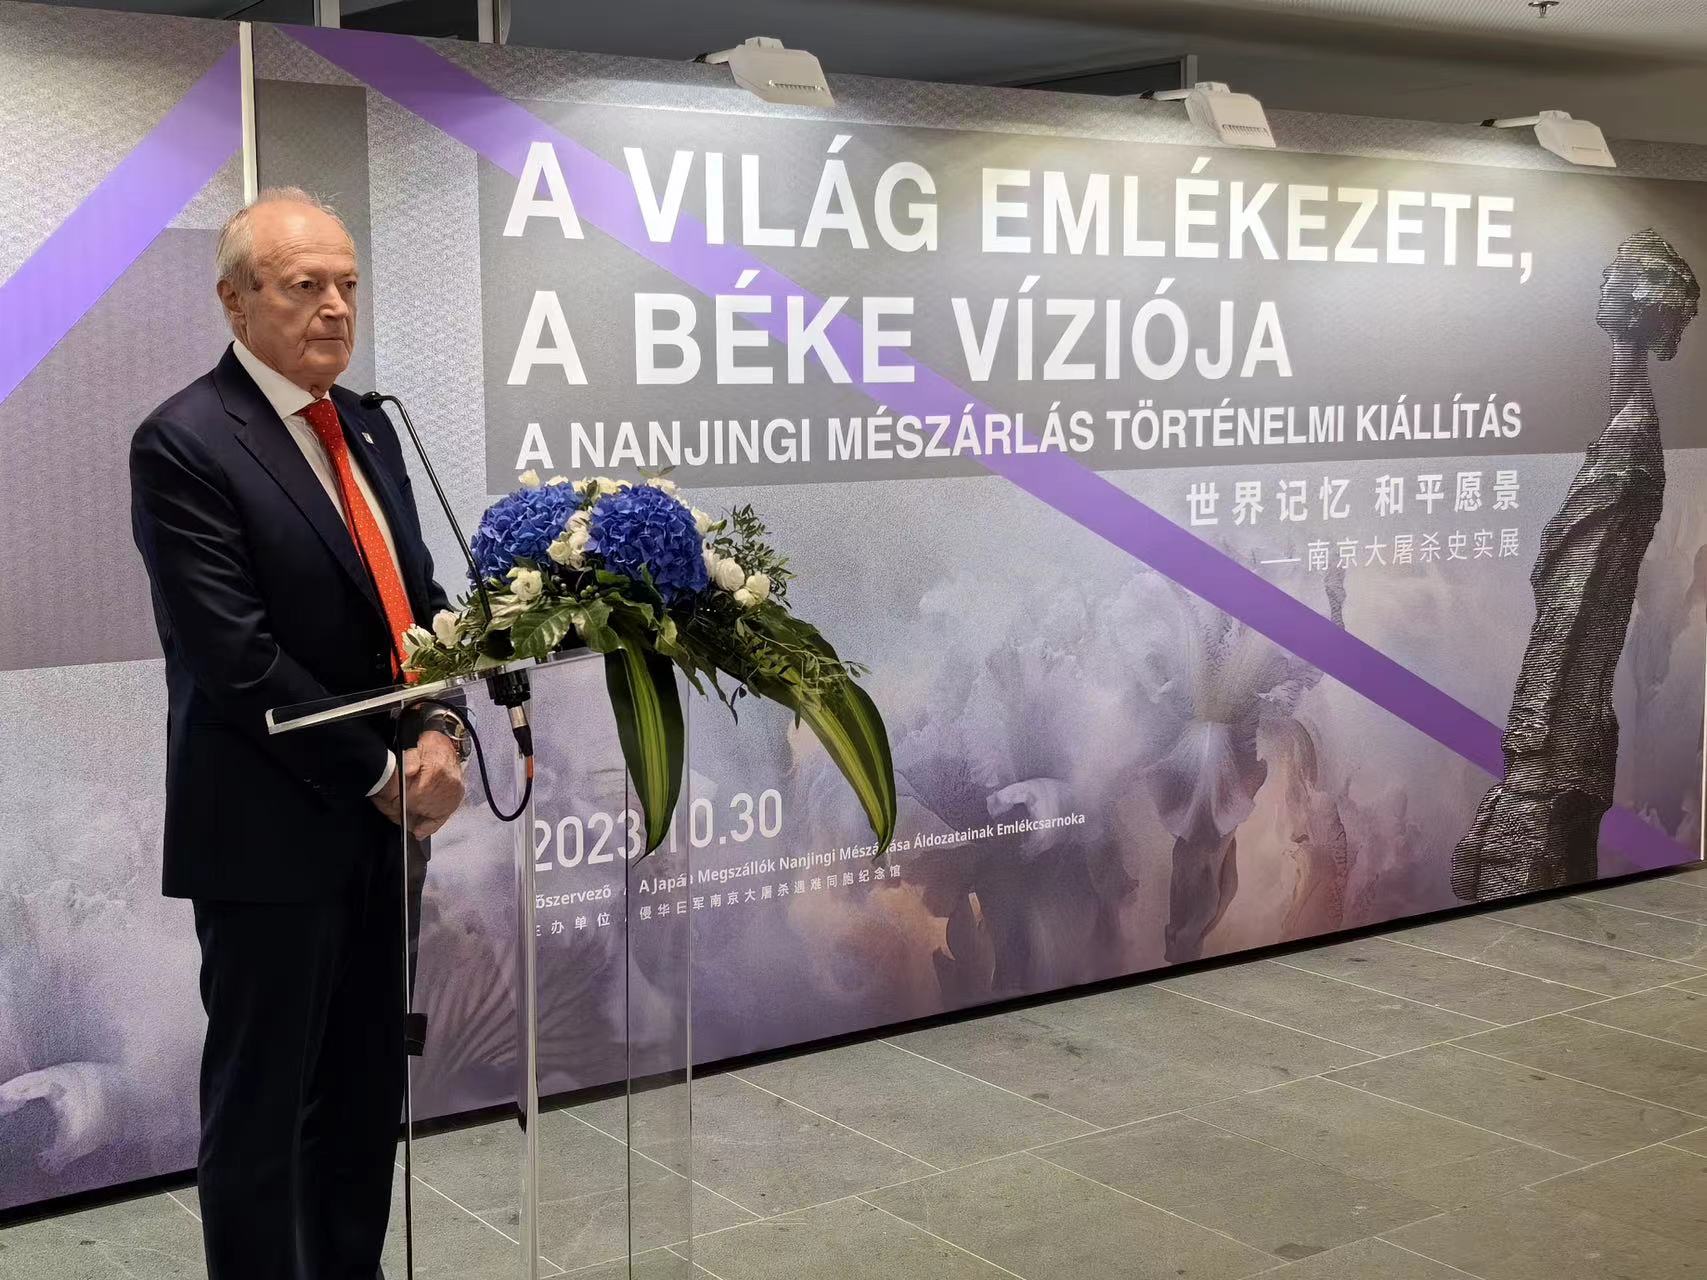 Former Hungarian Prime Minister Peter Medgyessy gave speech at the exhibition